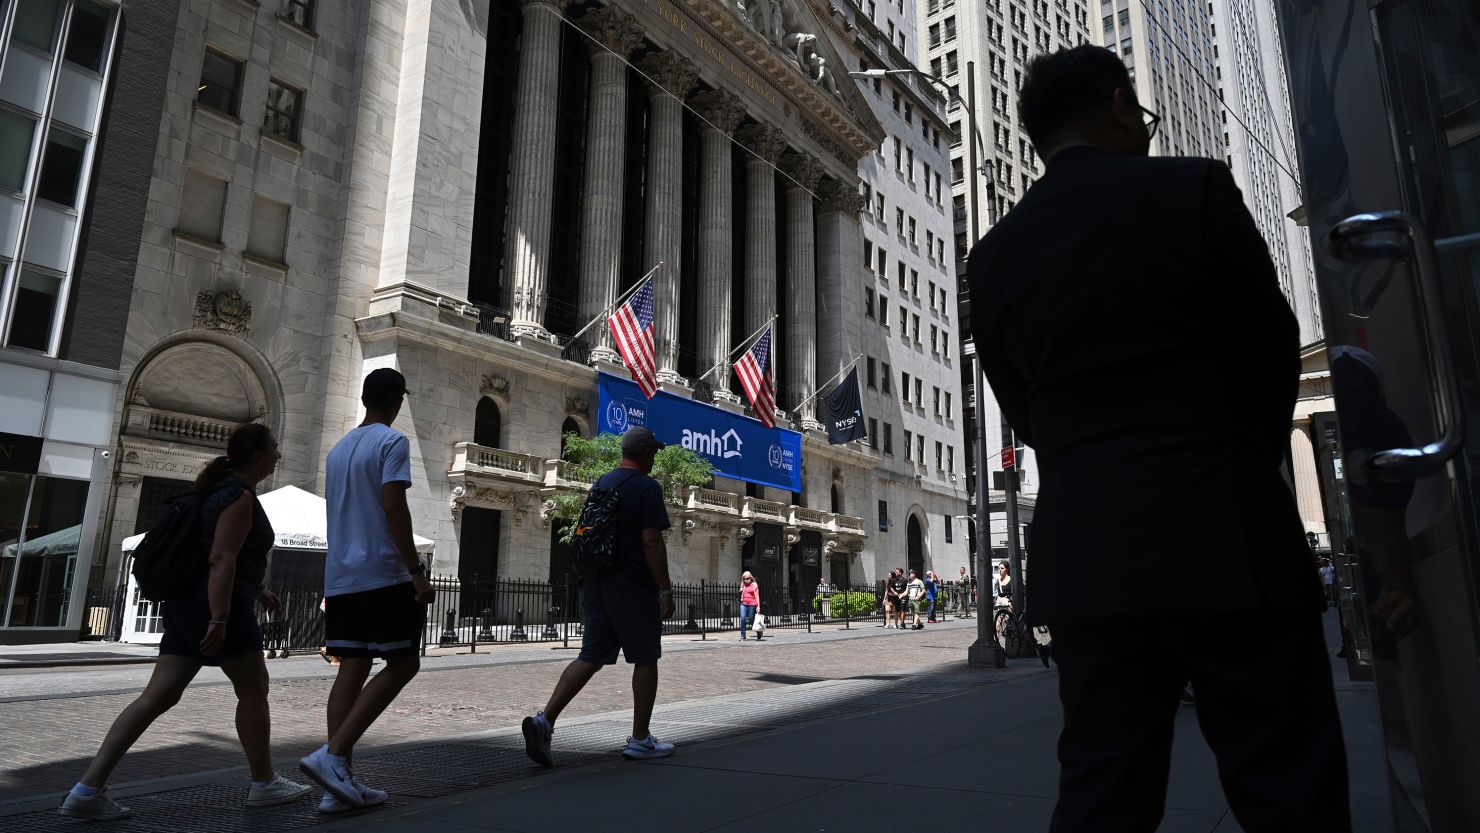 Photo by: NDZ/STAR MAX/IPx 2023 8/1/23 People walk past the New York Stock Exchange (NYSE) on Wall Street on August 1, 2023 in New York City.